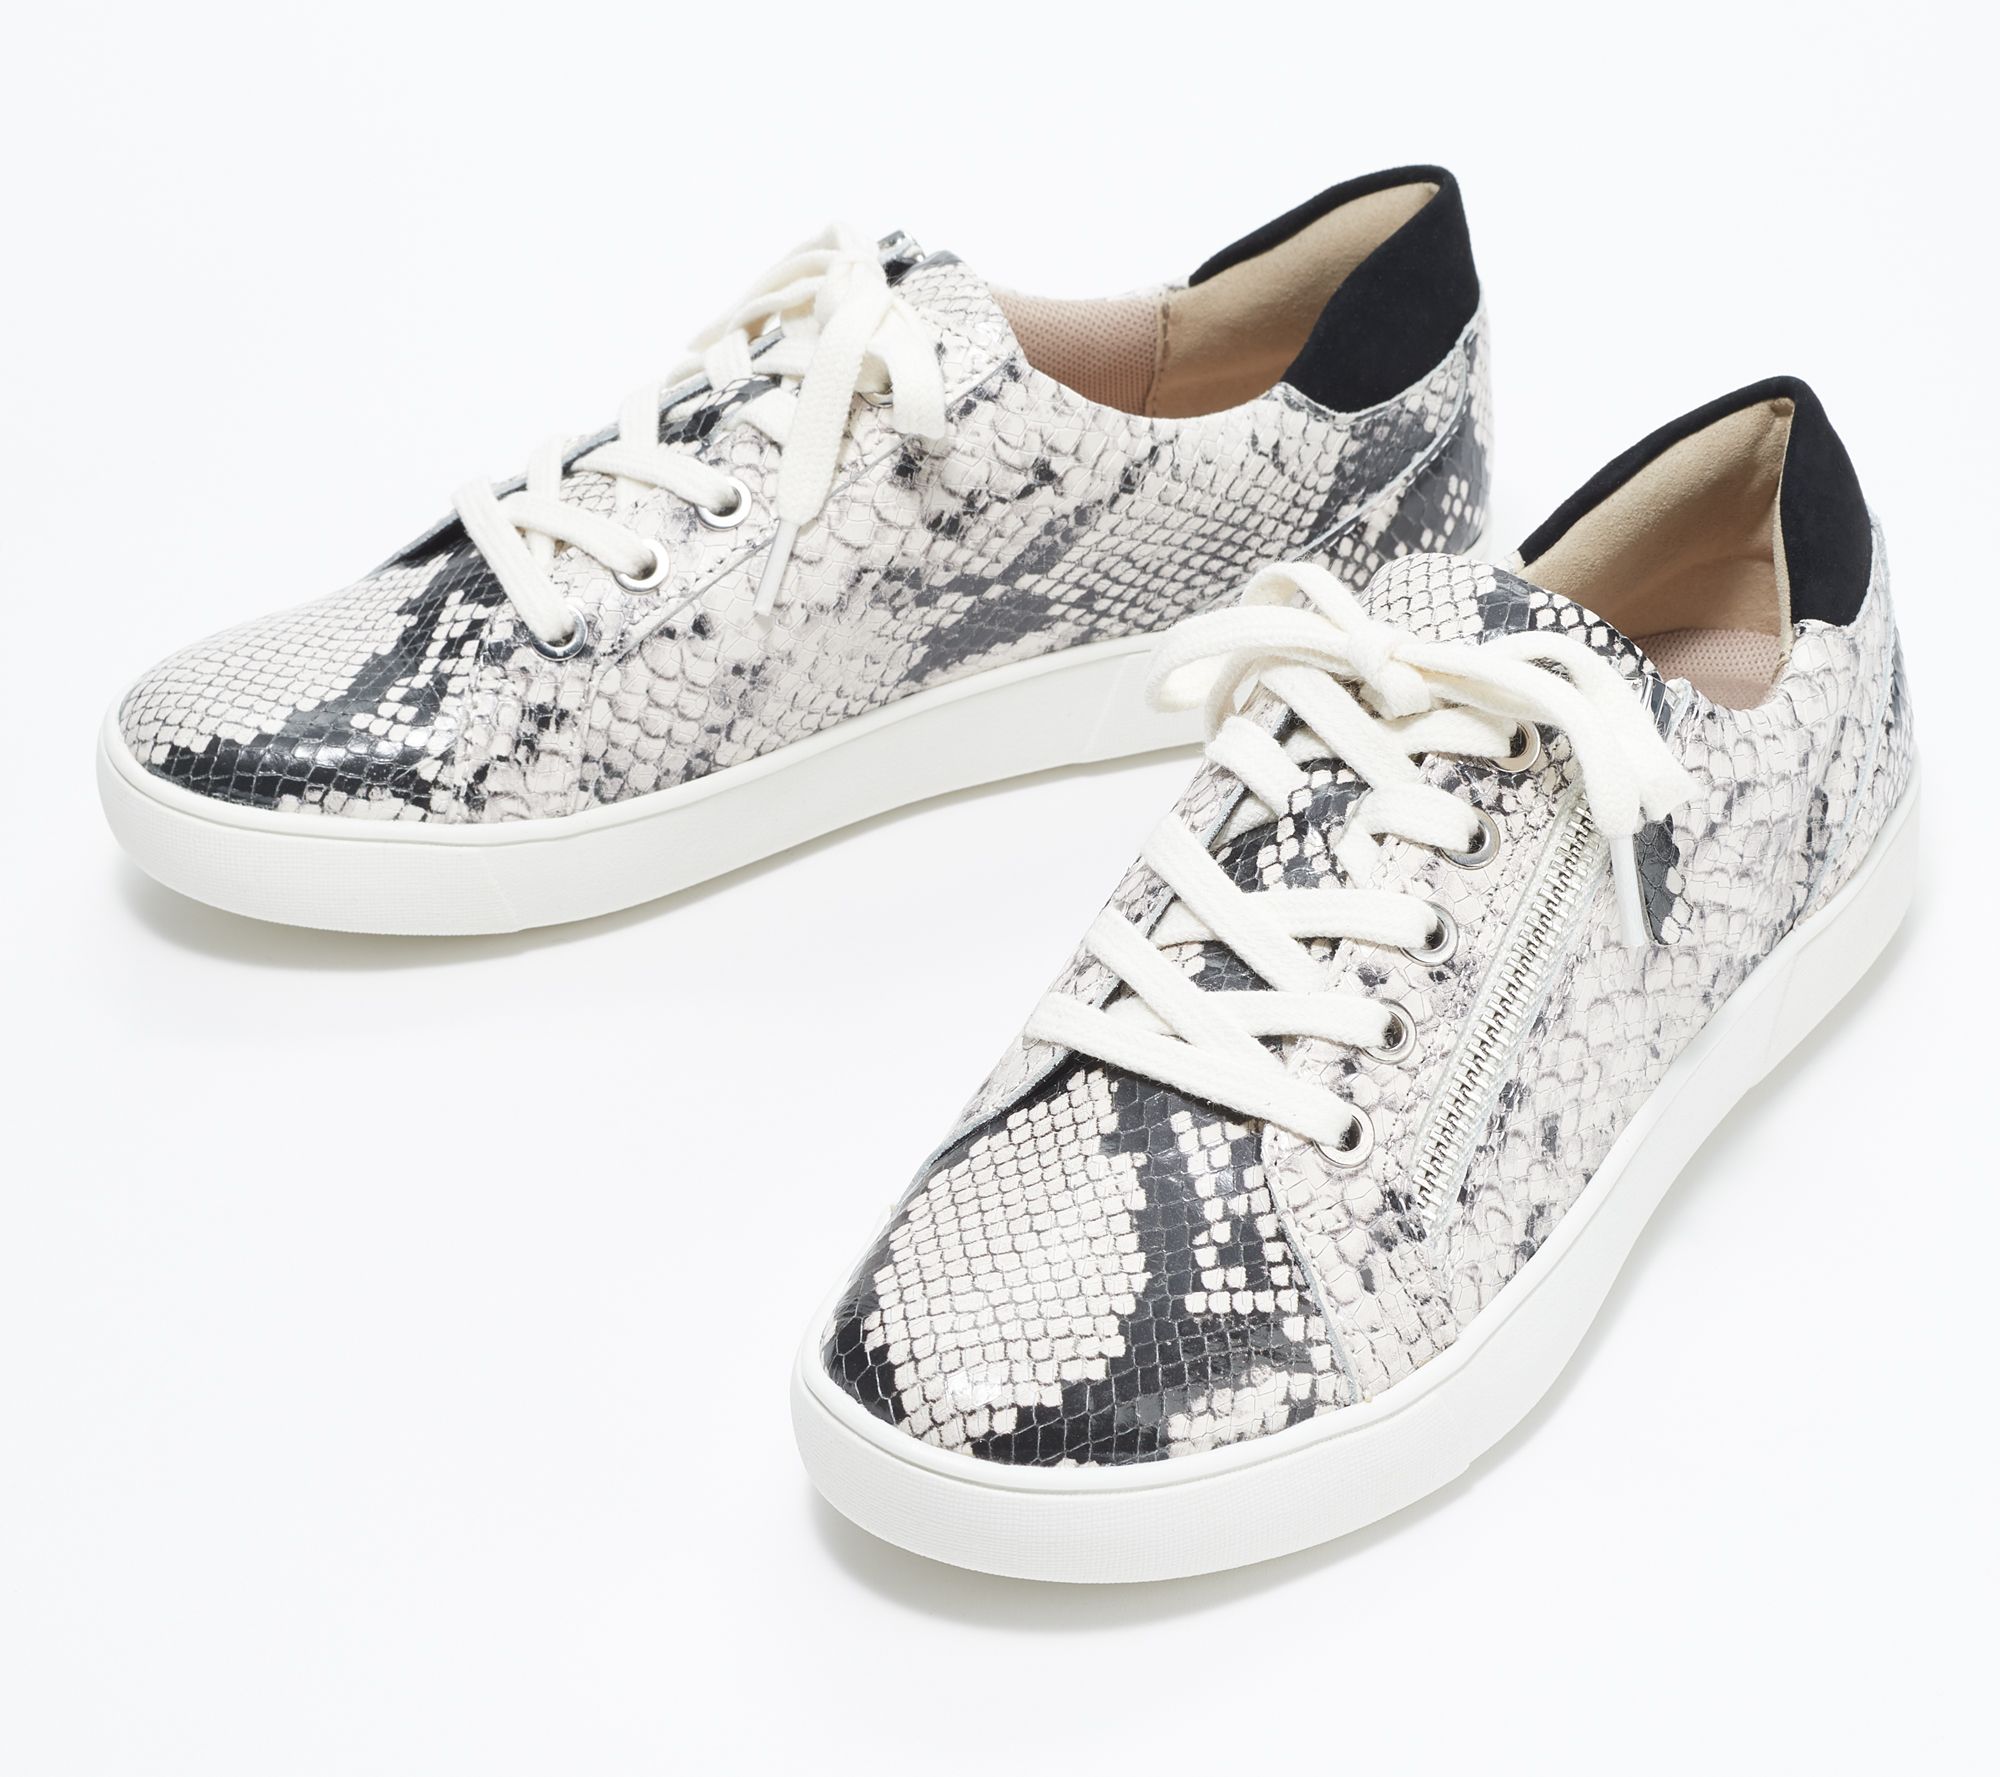 Naturalizer Lace-Up Side Zip Sneakers - Macayla - QVC.com